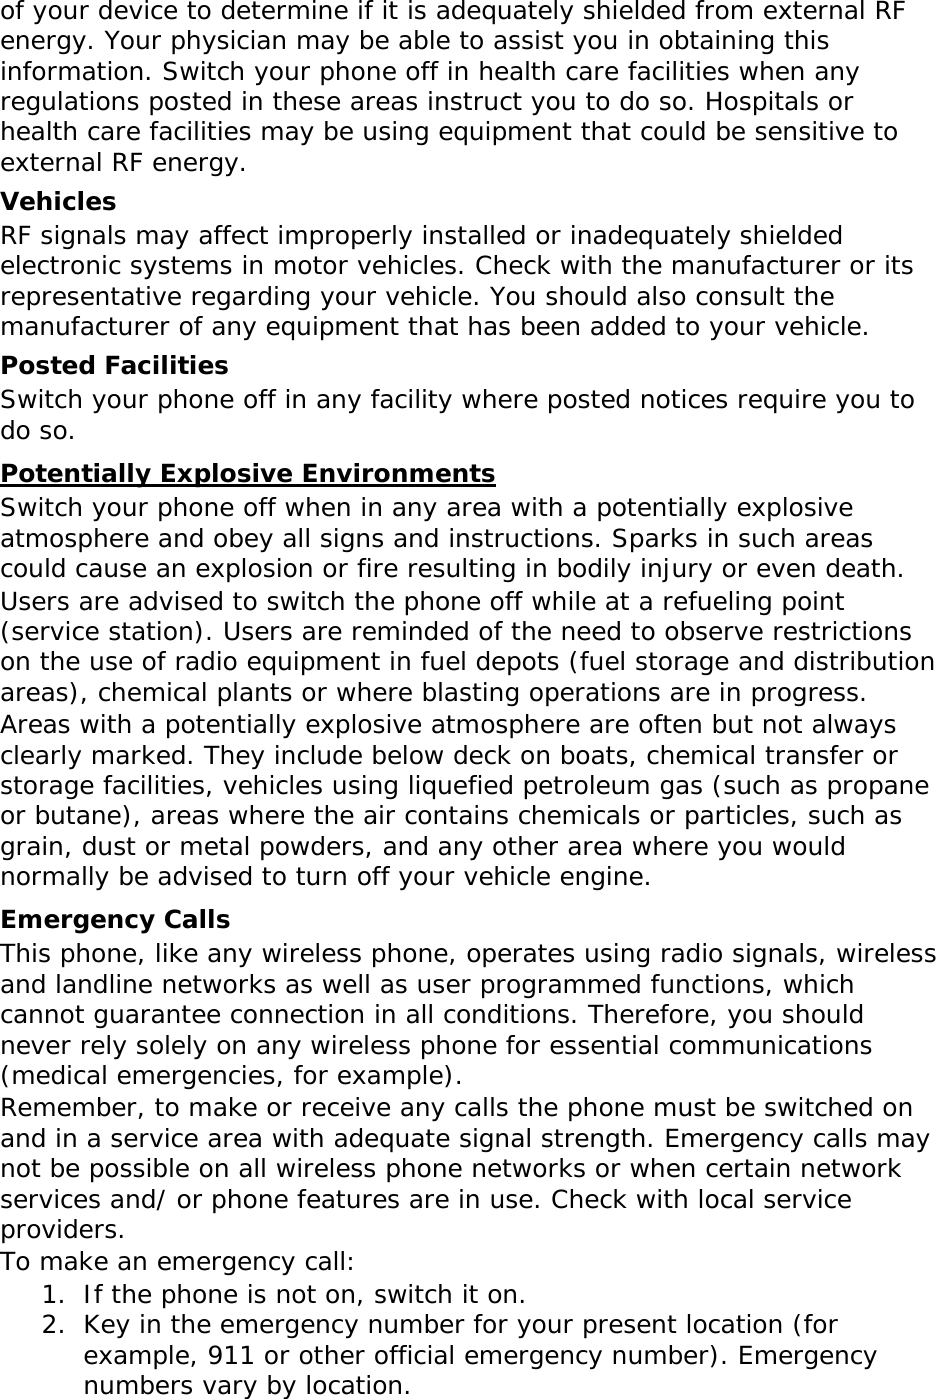   of your device to determine if it is adequately shielded from external RF energy. Your physician may be able to assist you in obtaining this information. Switch your phone off in health care facilities when any regulations posted in these areas instruct you to do so. Hospitals or health care facilities may be using equipment that could be sensitive to external RF energy. Vehicles RF signals may affect improperly installed or inadequately shielded electronic systems in motor vehicles. Check with the manufacturer or its representative regarding your vehicle. You should also consult the manufacturer of any equipment that has been added to your vehicle. Posted Facilities Switch your phone off in any facility where posted notices require you to do so. Potentially Explosive Environments Switch your phone off when in any area with a potentially explosive atmosphere and obey all signs and instructions. Sparks in such areas could cause an explosion or fire resulting in bodily injury or even death. Users are advised to switch the phone off while at a refueling point (service station). Users are reminded of the need to observe restrictions on the use of radio equipment in fuel depots (fuel storage and distribution areas), chemical plants or where blasting operations are in progress. Areas with a potentially explosive atmosphere are often but not always clearly marked. They include below deck on boats, chemical transfer or storage facilities, vehicles using liquefied petroleum gas (such as propane or butane), areas where the air contains chemicals or particles, such as grain, dust or metal powders, and any other area where you would normally be advised to turn off your vehicle engine. Emergency Calls This phone, like any wireless phone, operates using radio signals, wireless and landline networks as well as user programmed functions, which cannot guarantee connection in all conditions. Therefore, you should never rely solely on any wireless phone for essential communications (medical emergencies, for example). Remember, to make or receive any calls the phone must be switched on and in a service area with adequate signal strength. Emergency calls may not be possible on all wireless phone networks or when certain network services and/ or phone features are in use. Check with local service providers. To make an emergency call: 1. If the phone is not on, switch it on. 2. Key in the emergency number for your present location (for example, 911 or other official emergency number). Emergency numbers vary by location. 